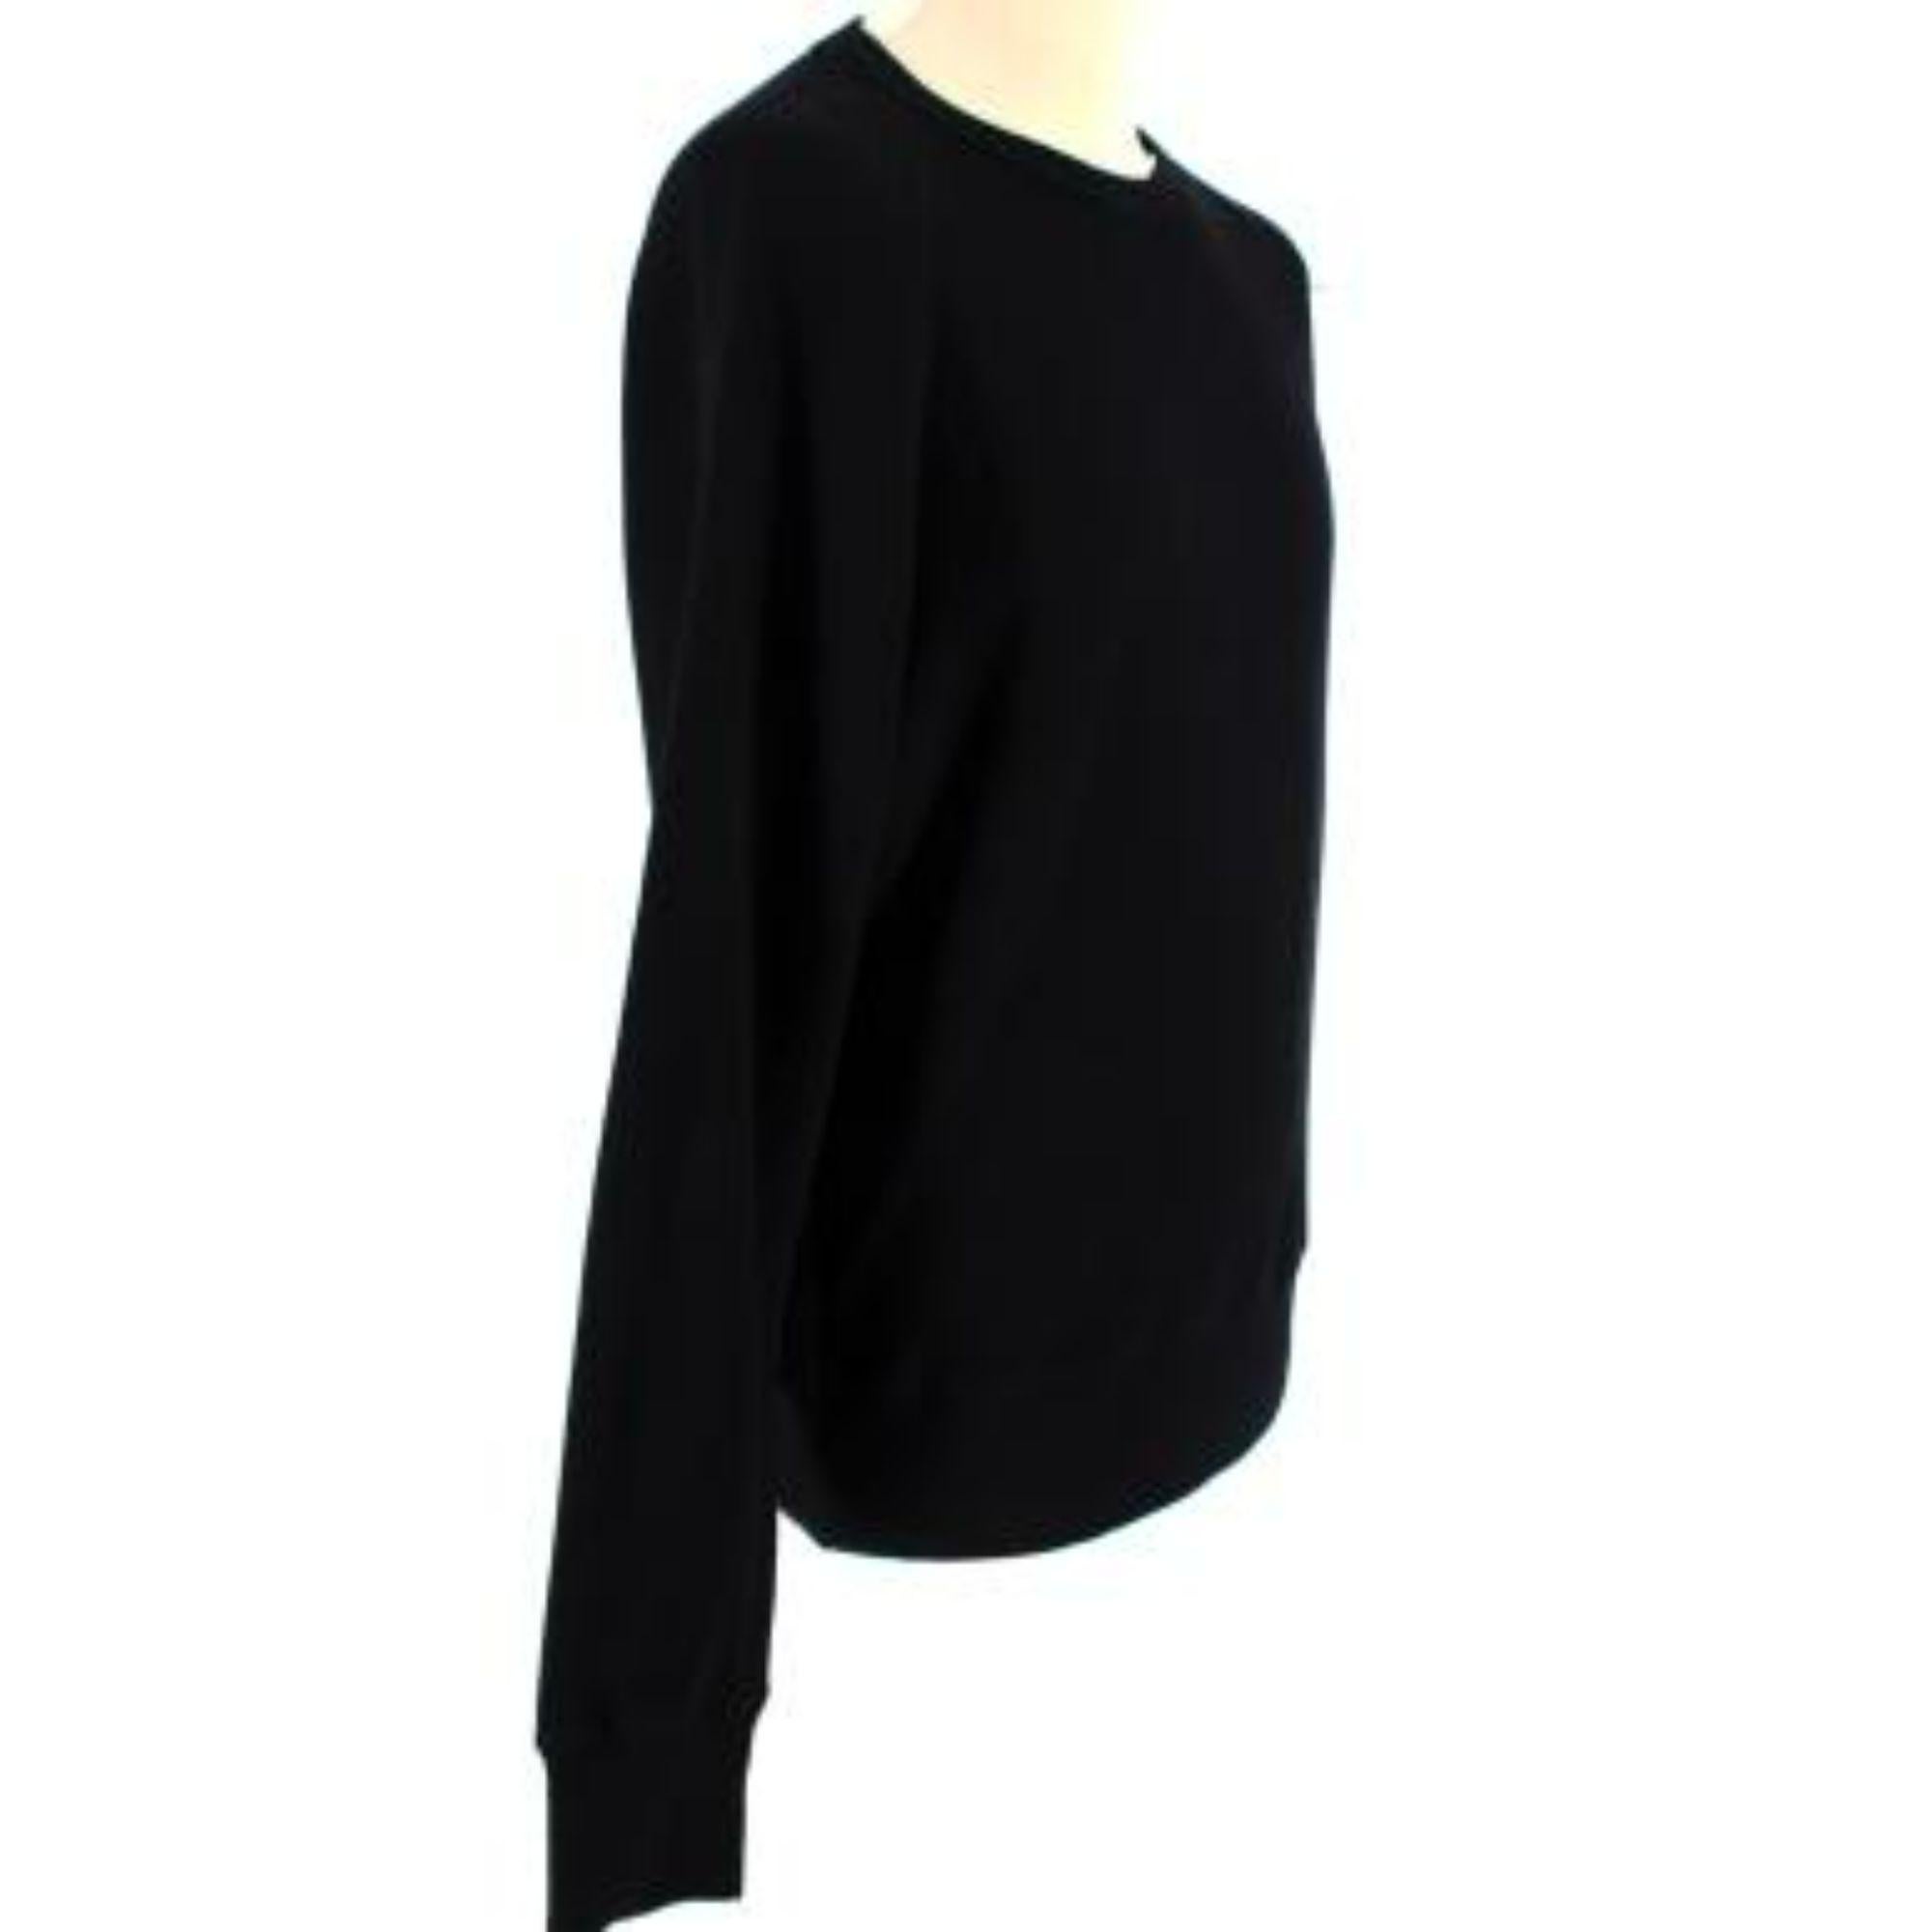 Tom Ford Black Crew Neck Jumper In Good Condition For Sale In London, GB